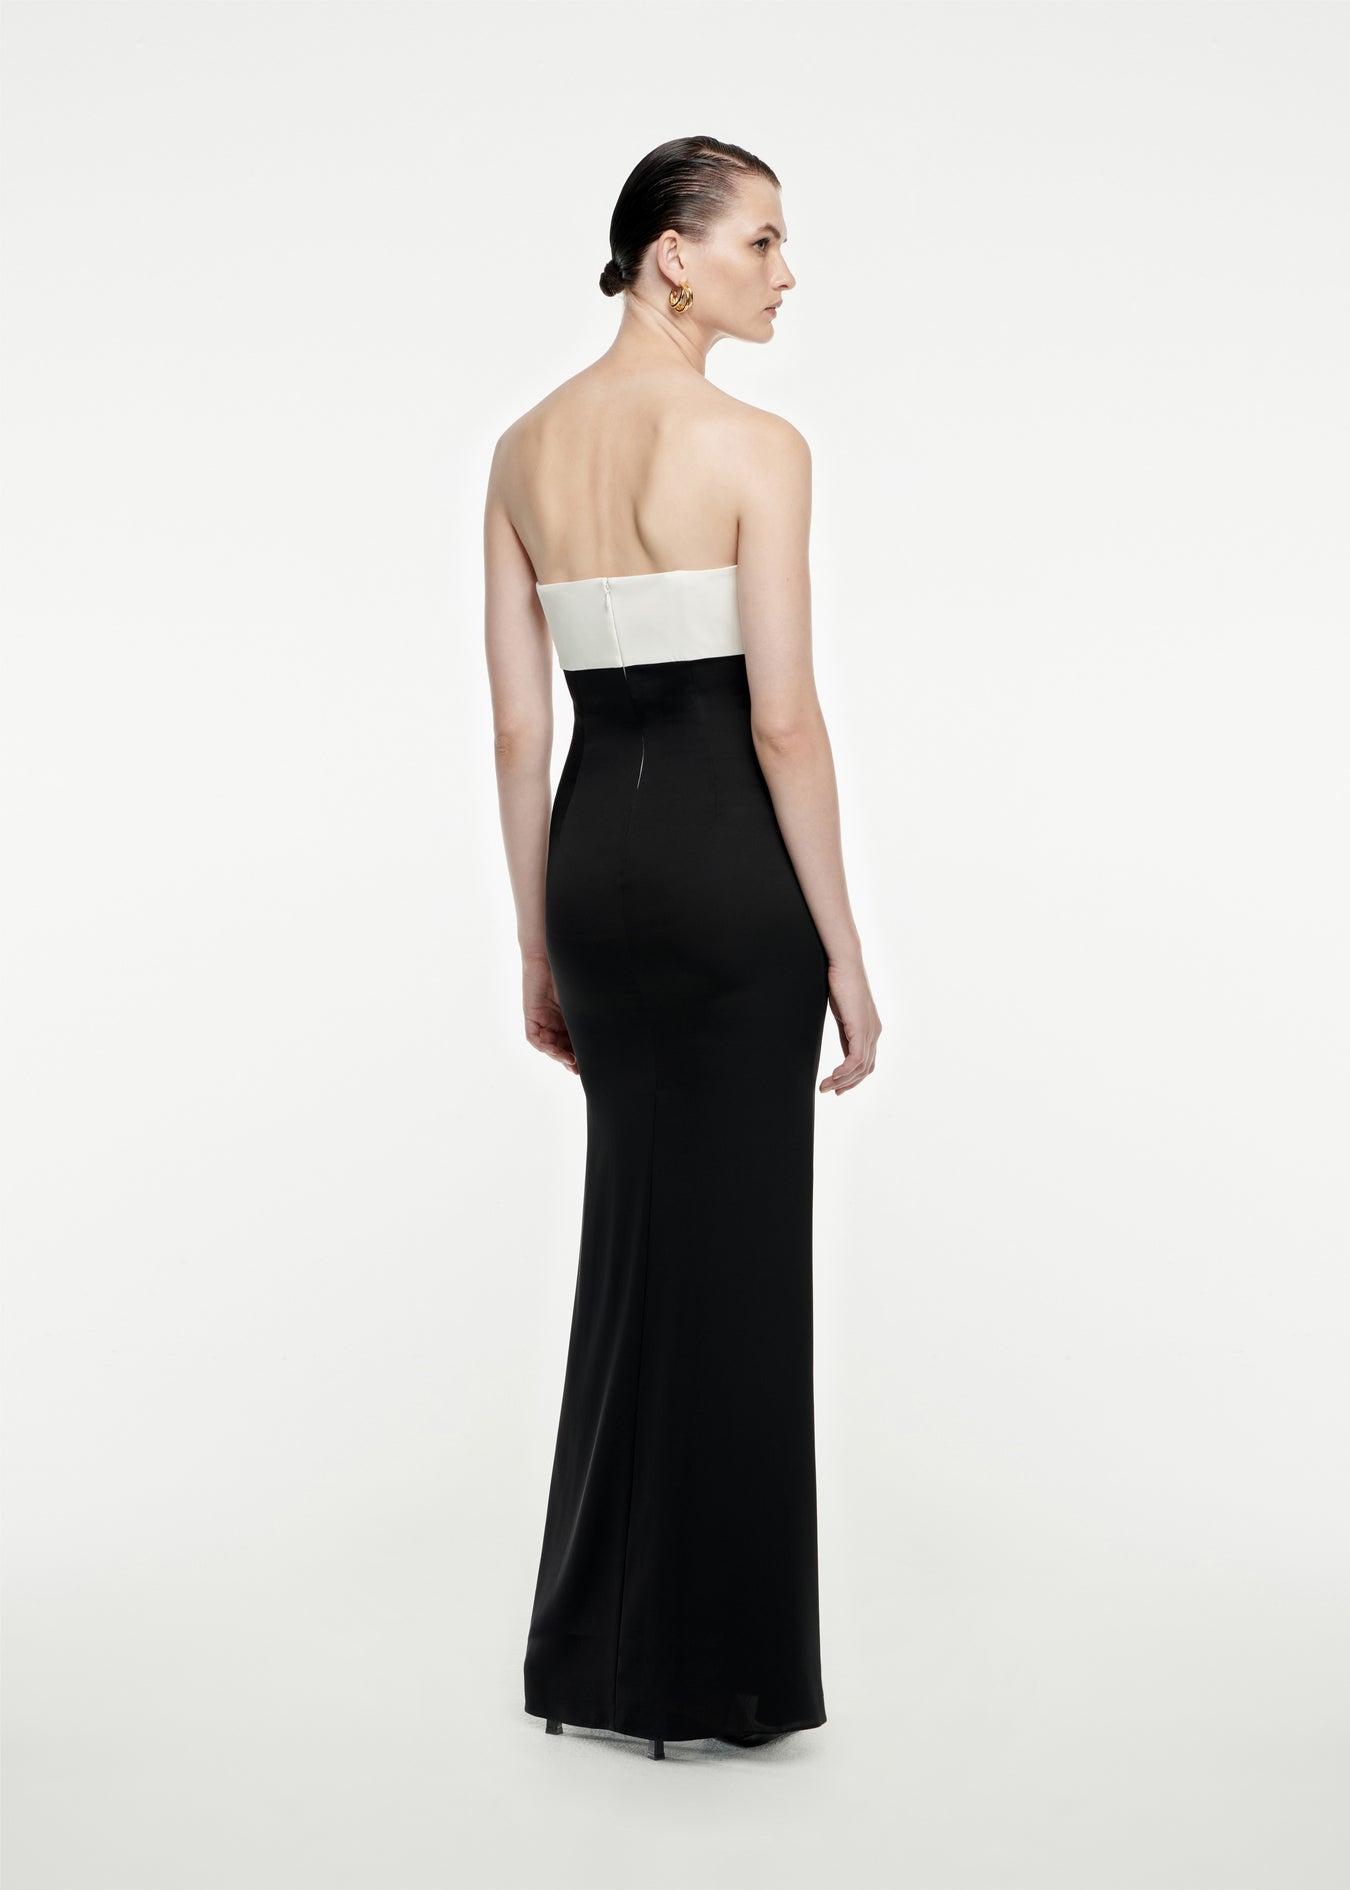 The back of a woman wearing the Strapless Stretch Silk Crepe Maxi Dress in Black